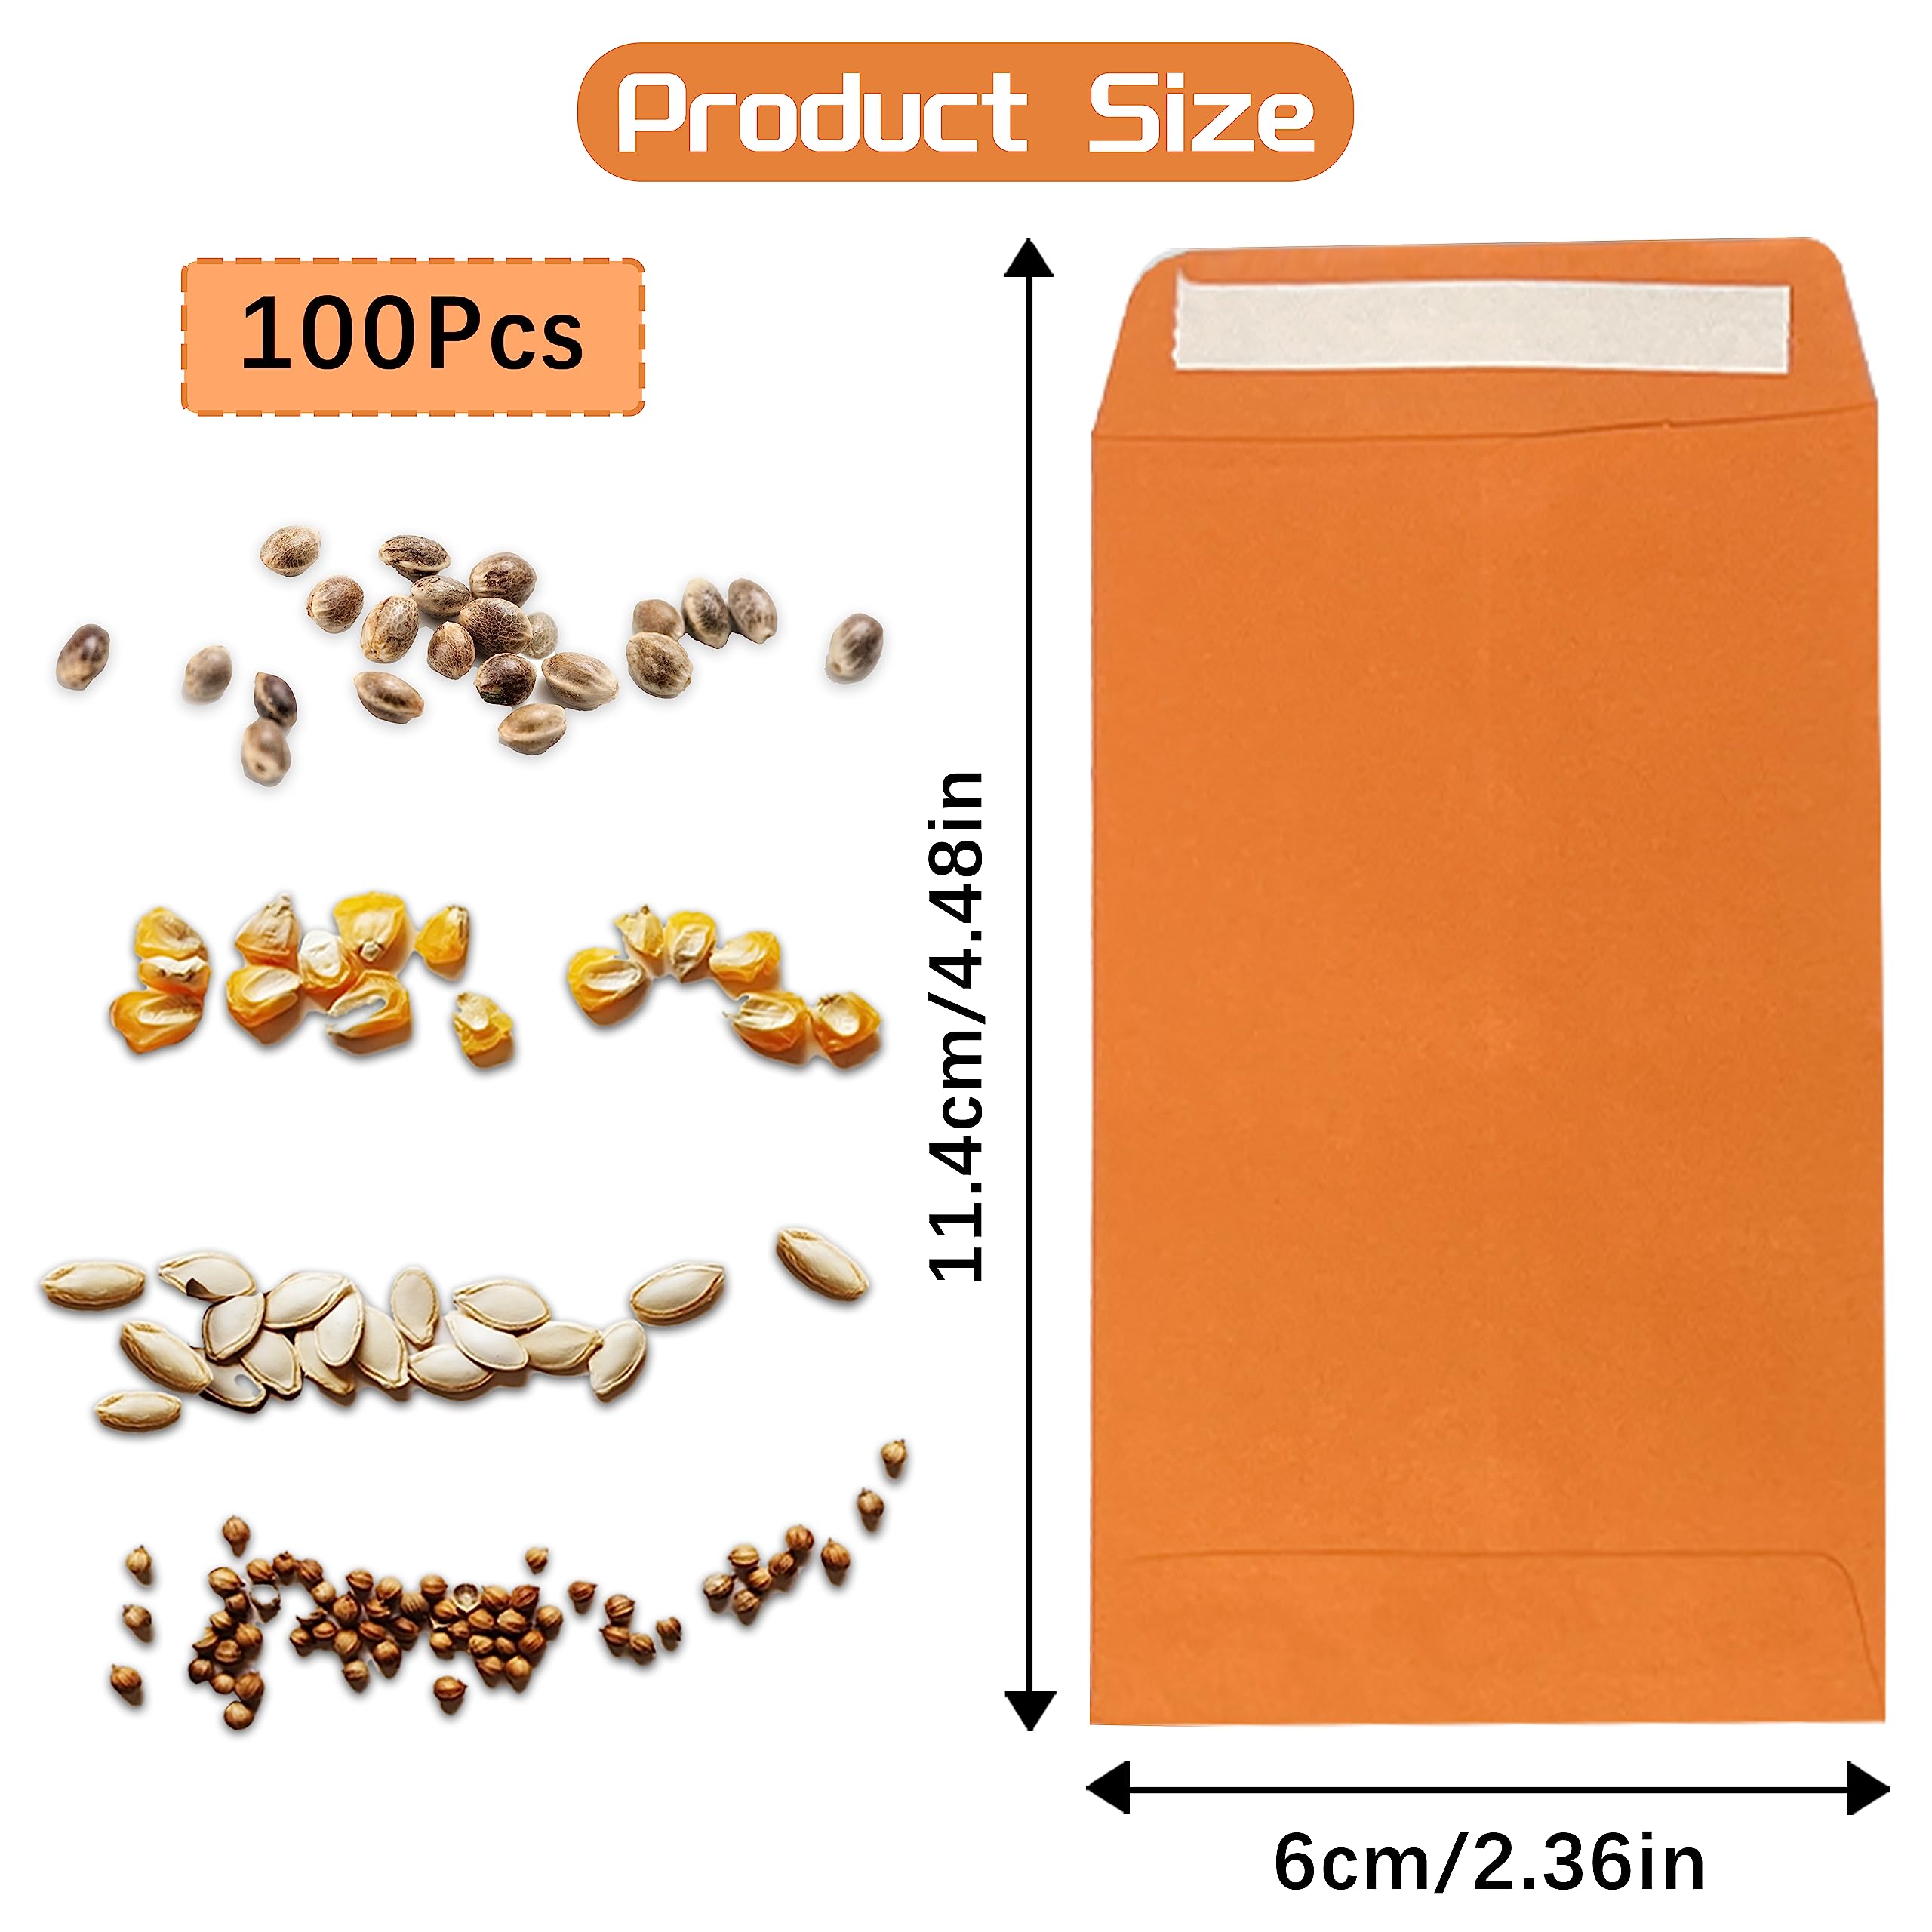 100Pcs Money Envelopes, Coloured Seed Envelopes Self-Adhesive Seed Packets Mini Envelopes Coin Envelopes for Wages, Seeds, Coins, Beads or Stamps(10x6cm/3.9x2.4inch)